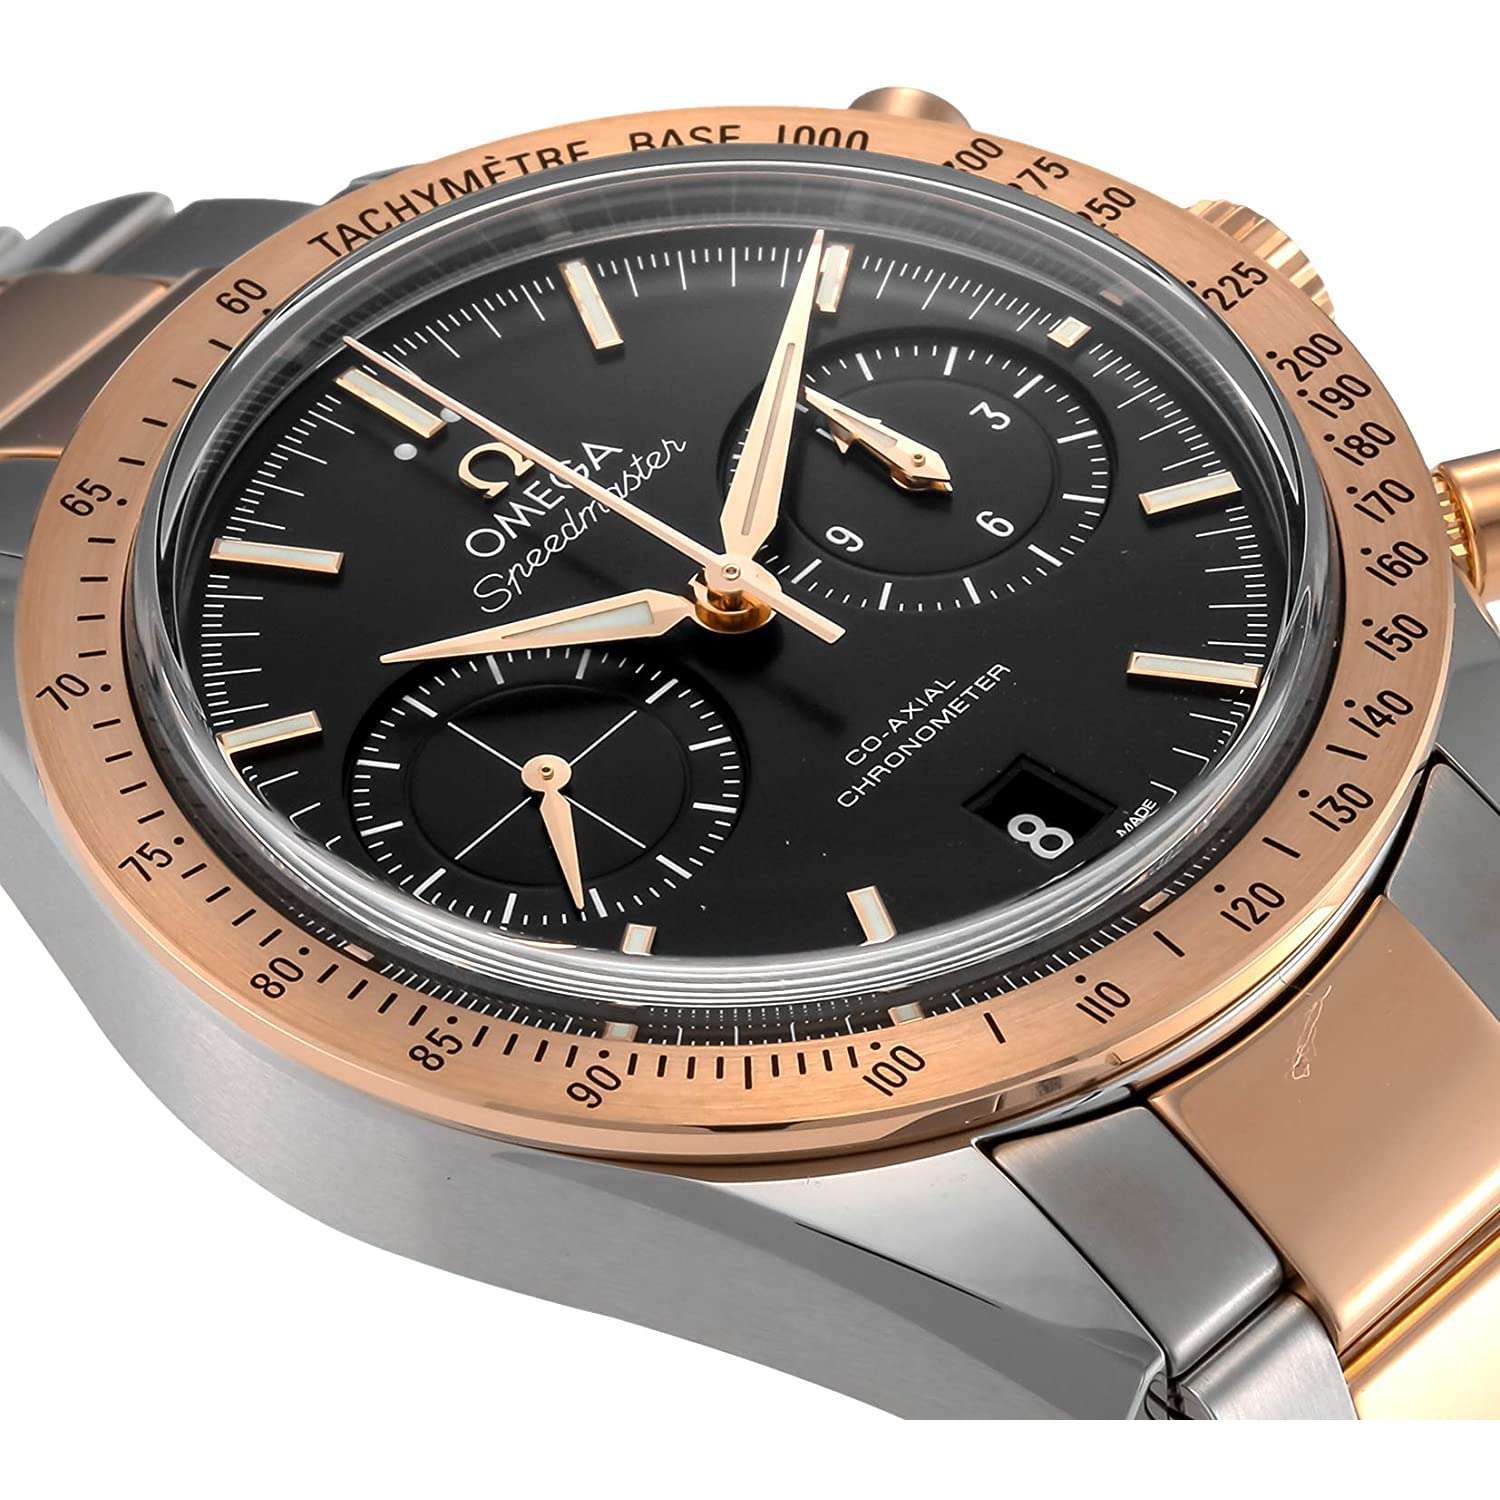 ROOK JAPAN:OMEGA SPEEDMASTER CO-AXIAL CHRONOMETER 42 MM MEN WATCH 331.20.42.51.01.002,Luxury Watch,Omega